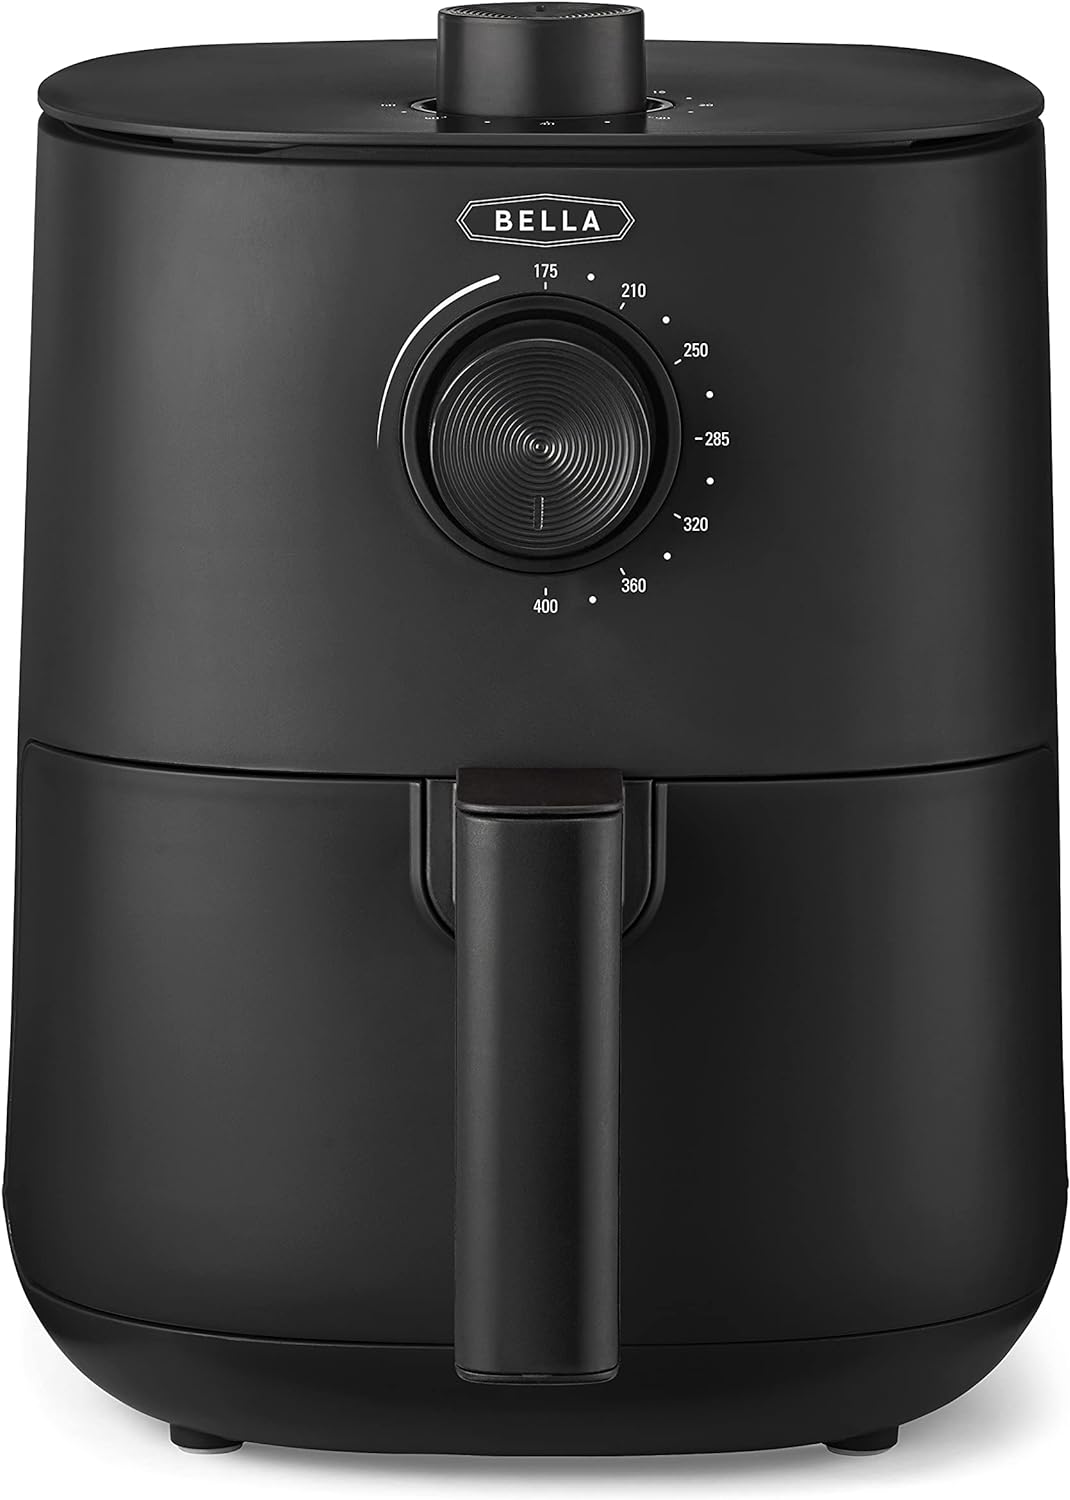 BELLA 3 Qt Manual Air Fryer Oven and 5-in-1 Multicooker with Removable Nonstick and Dishwasher